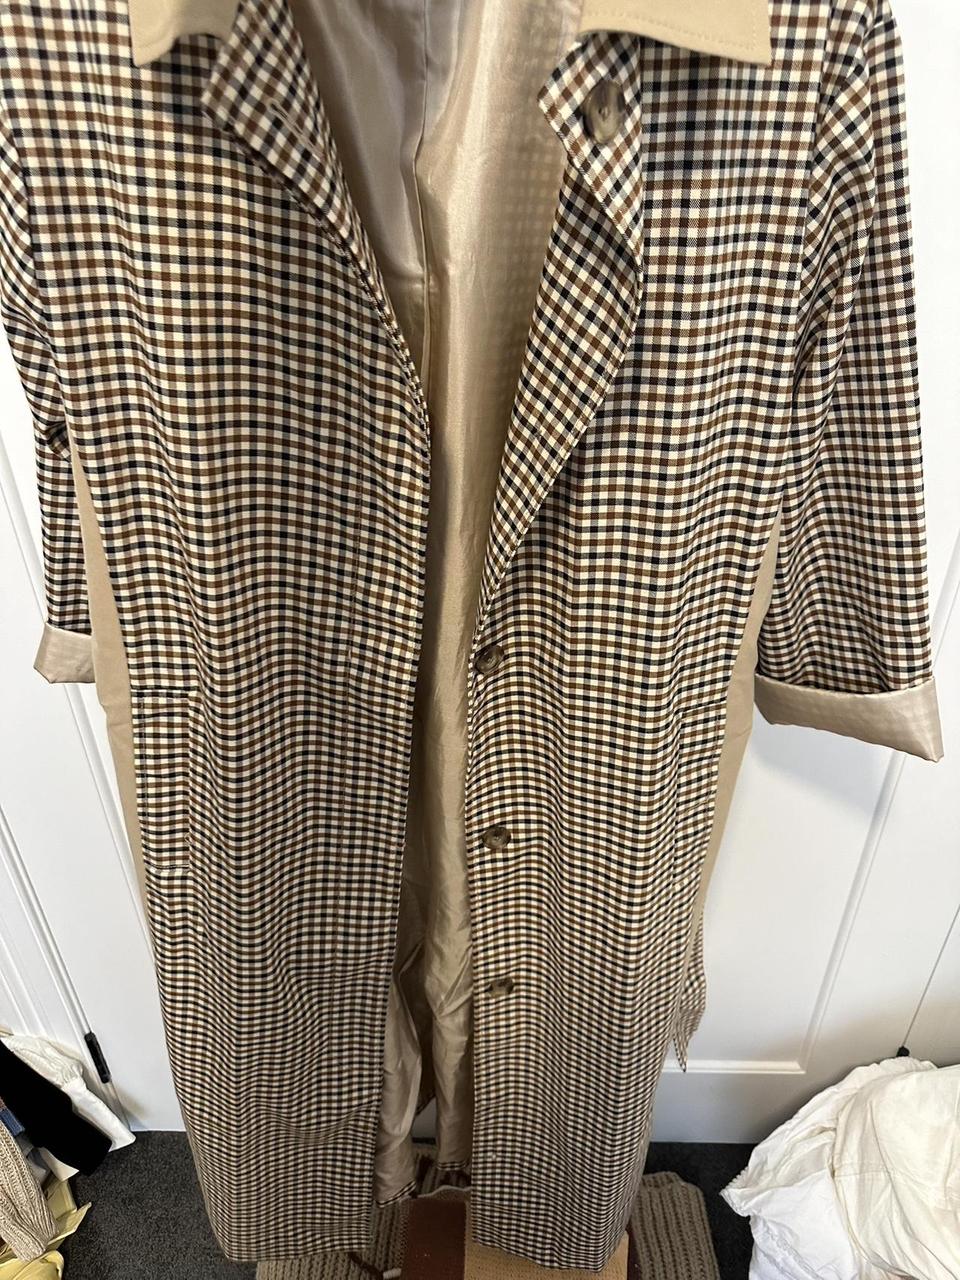 Gingham check trench coat, absolutely love it but I... - Depop